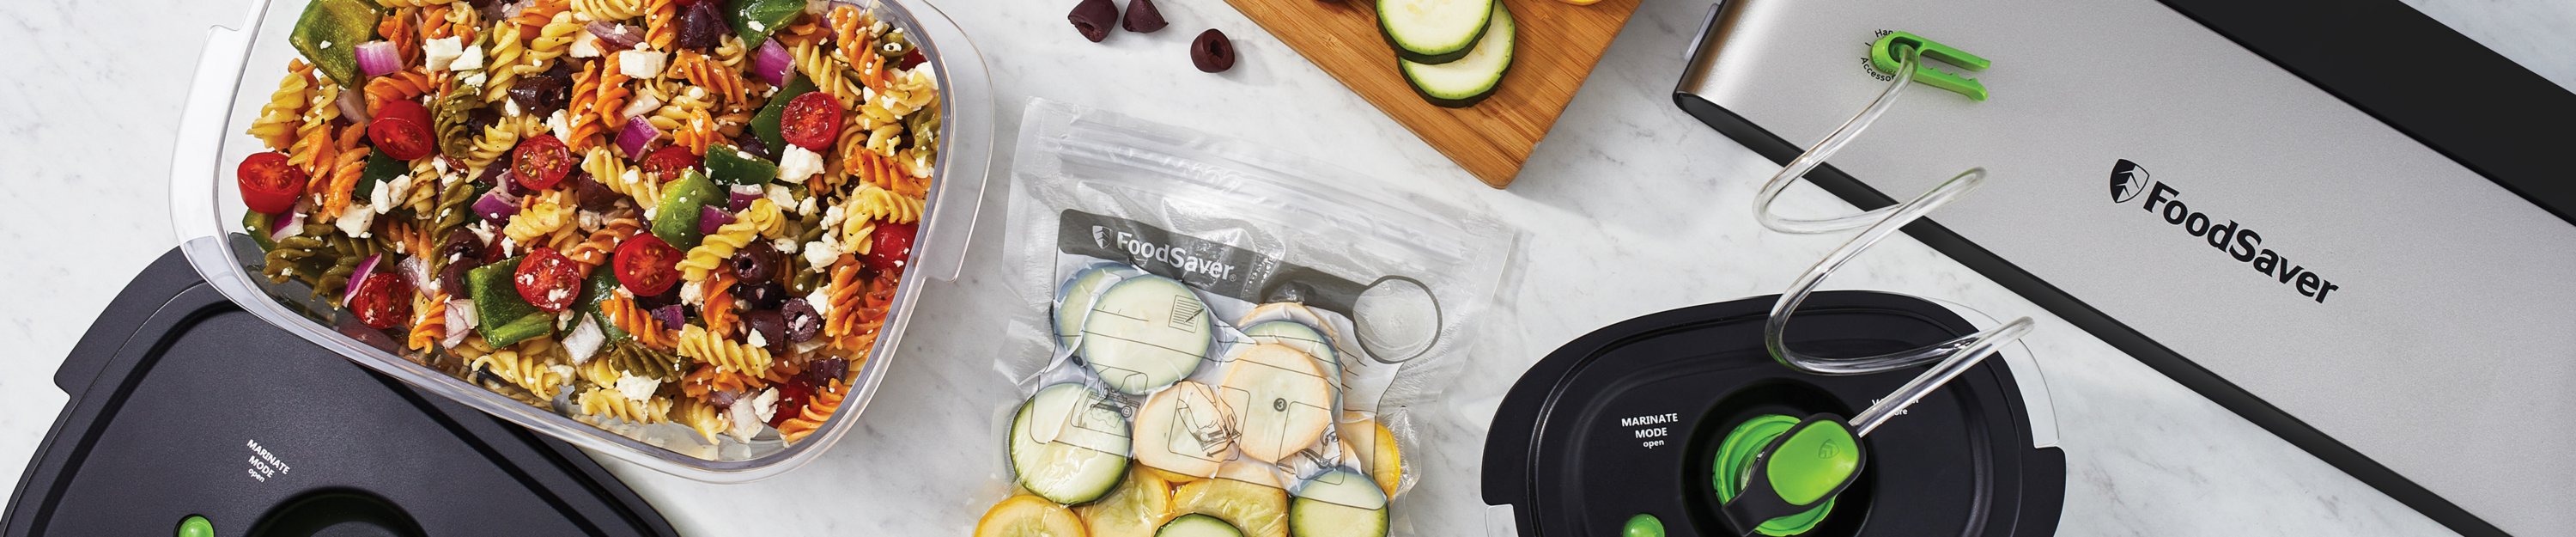 How to Marinate Meat in Minutes with your FoodSaver Vacuum Sealing